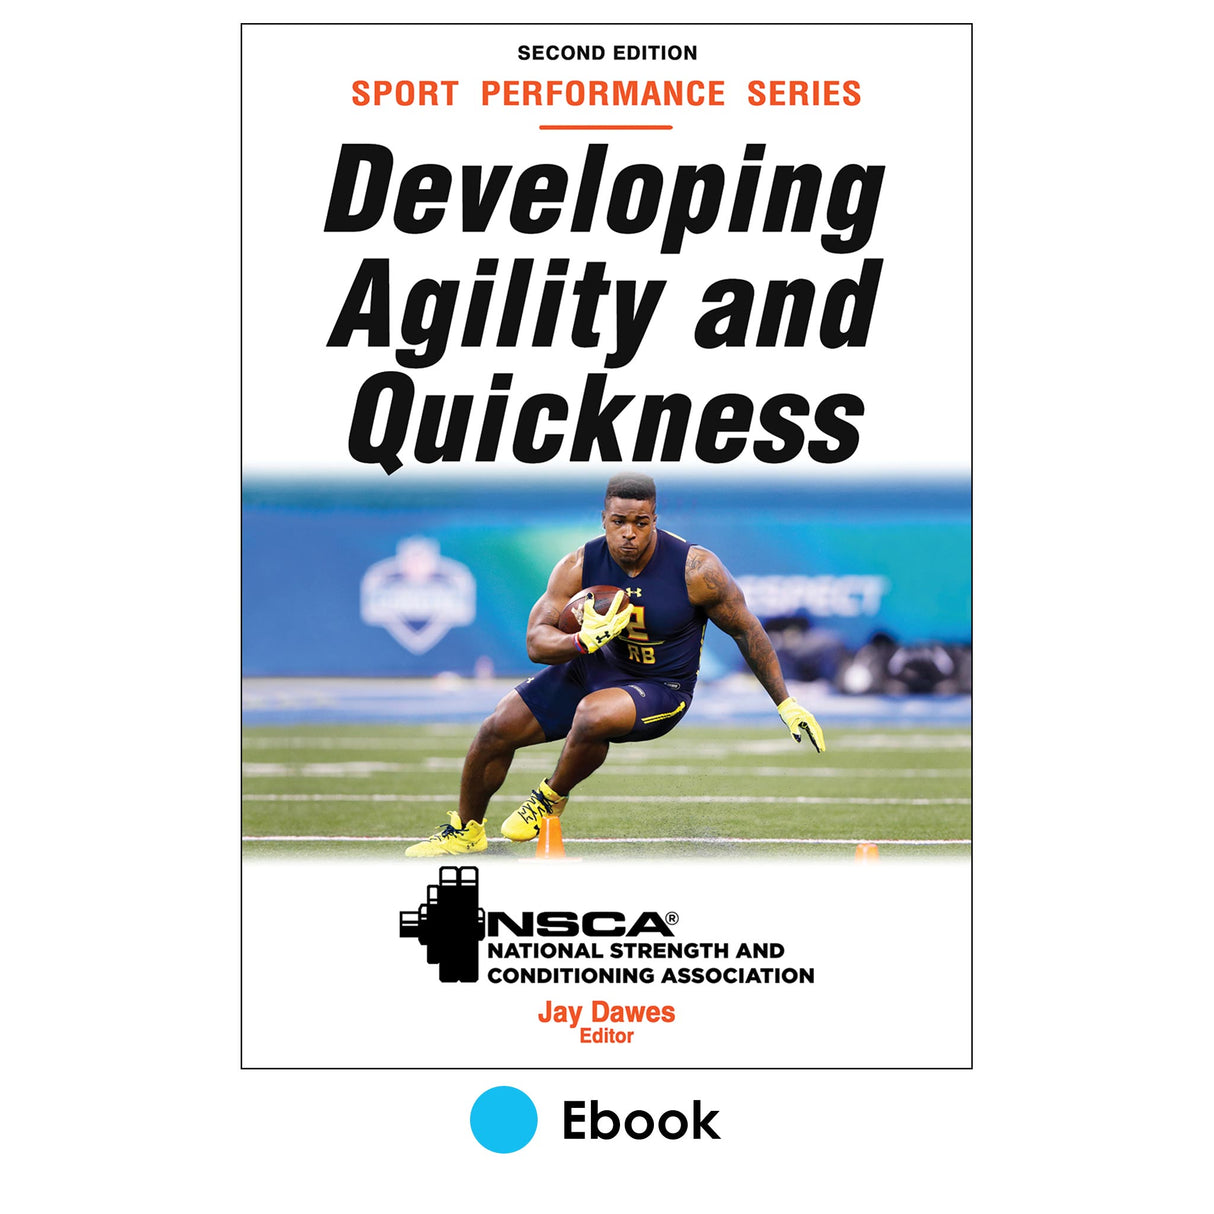 Developing Agility and Quickness 2nd Edition epub